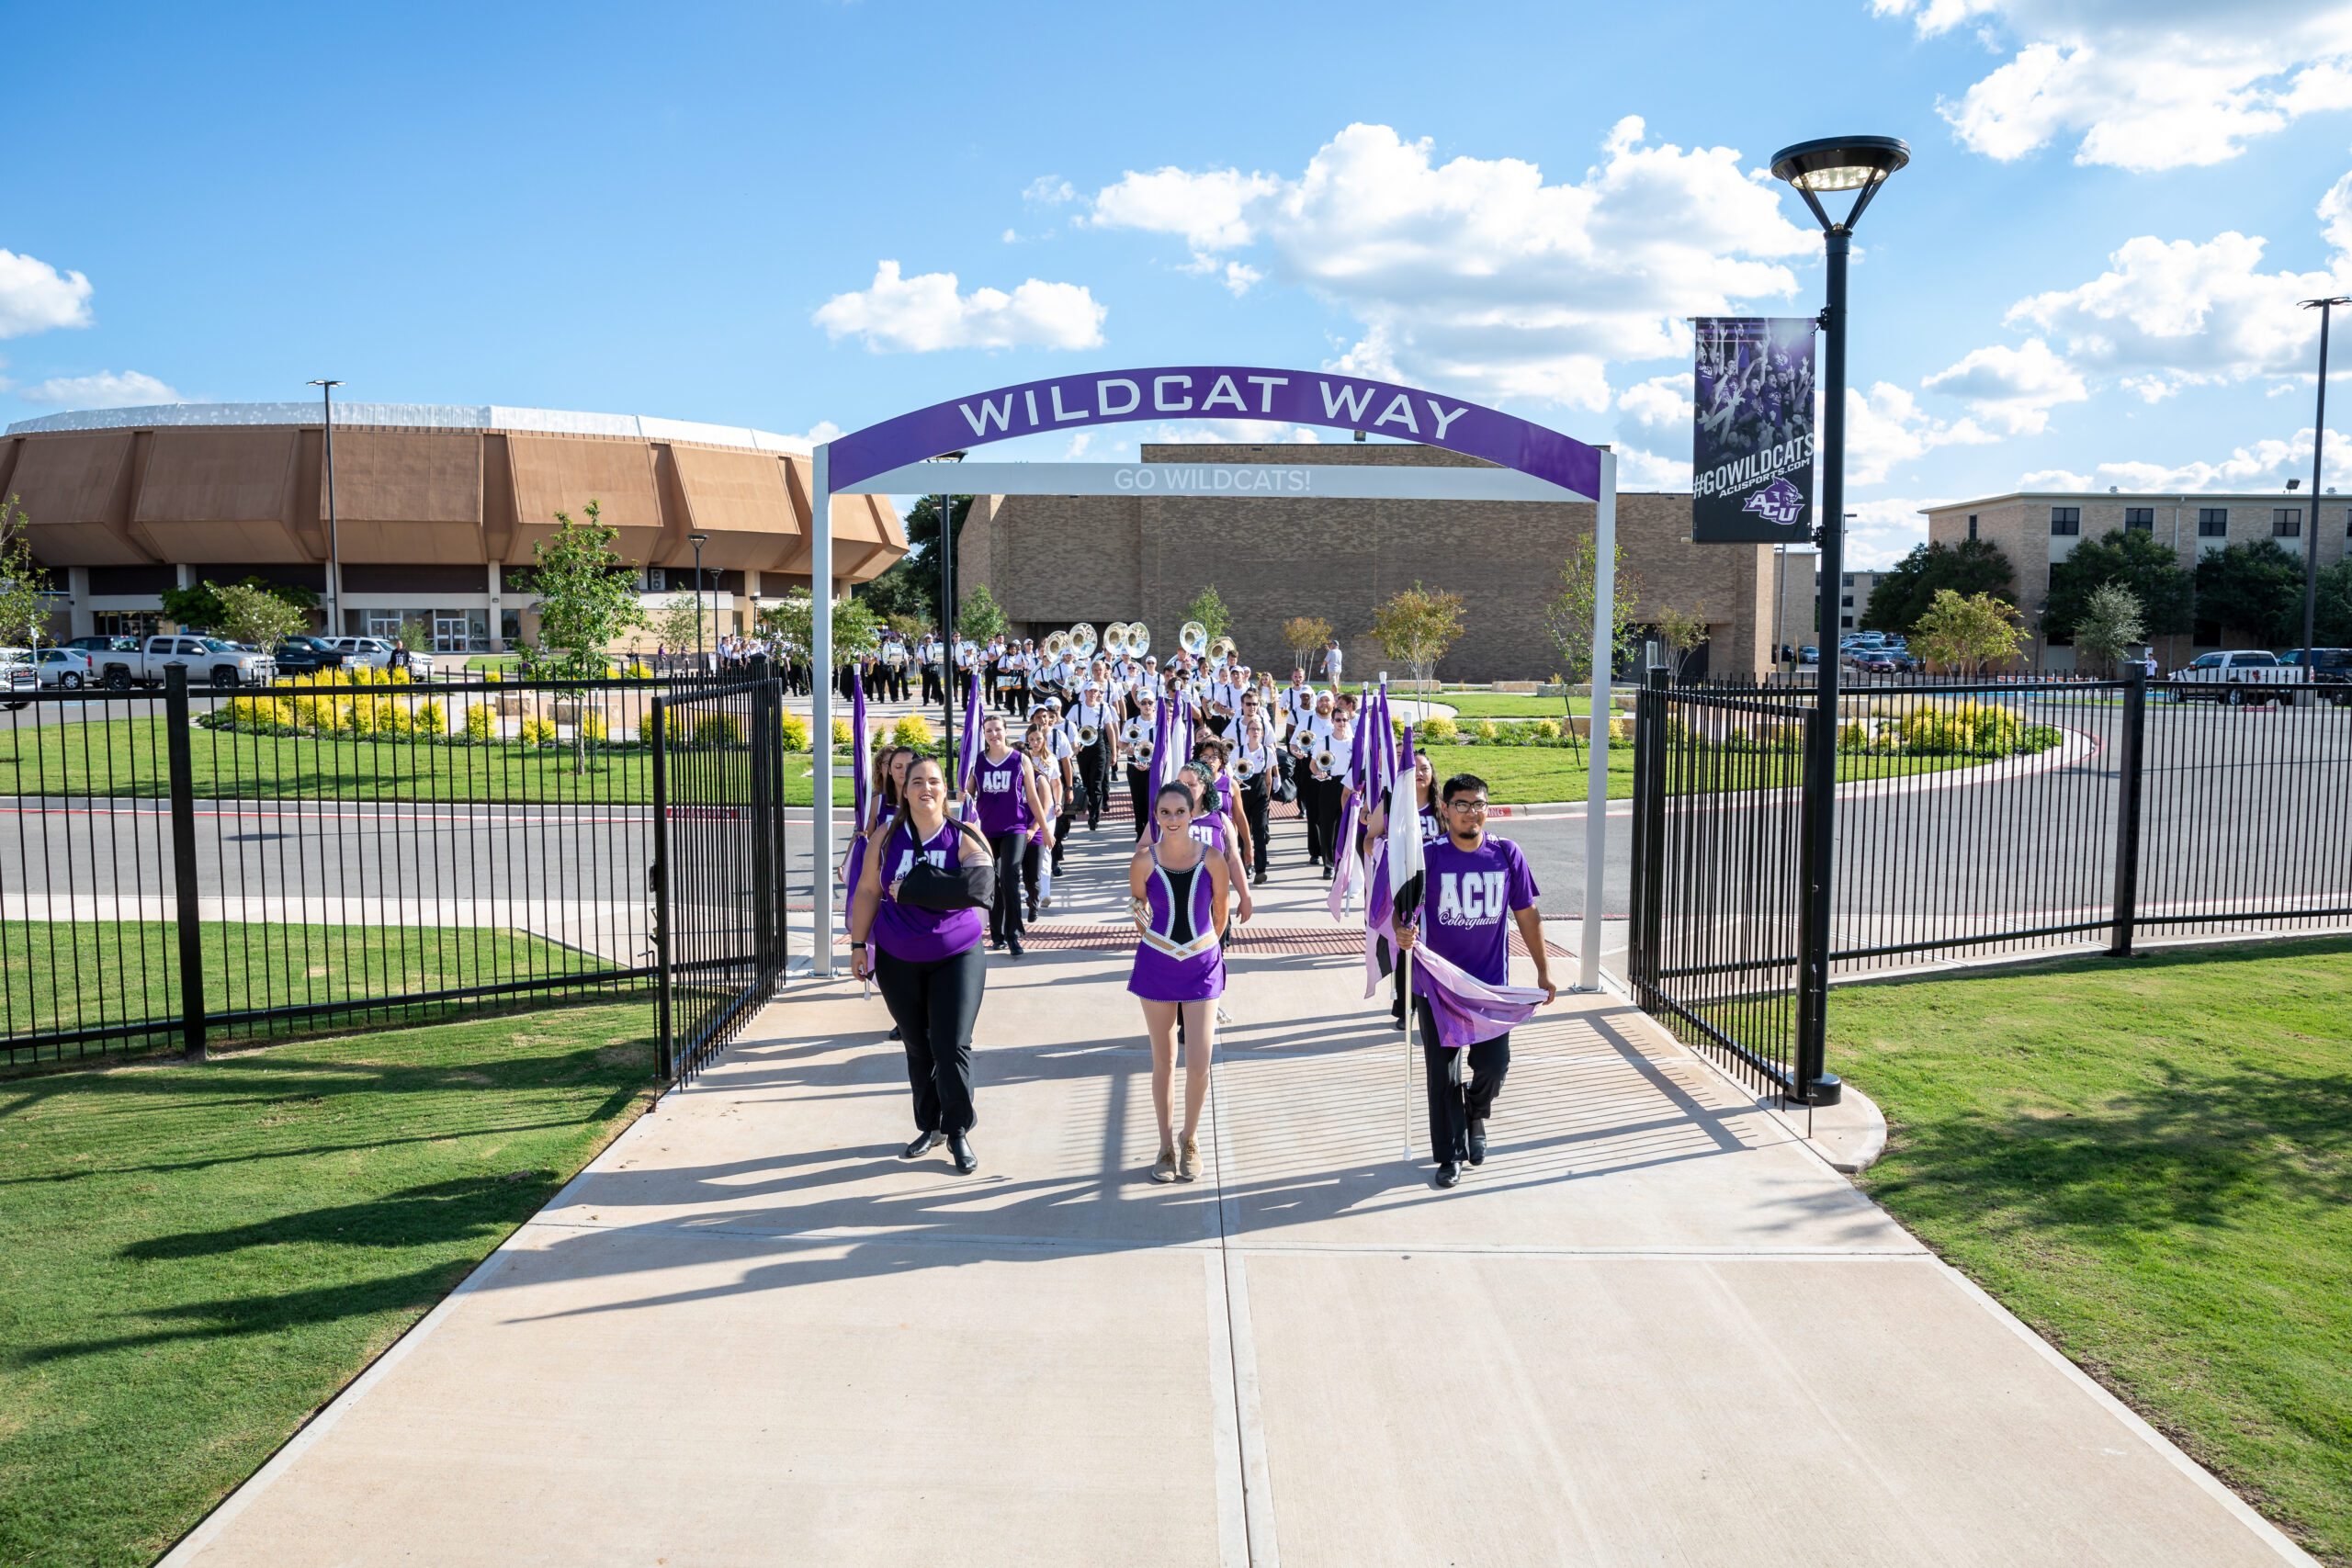 A group of students walking through the “Wildcat Way”